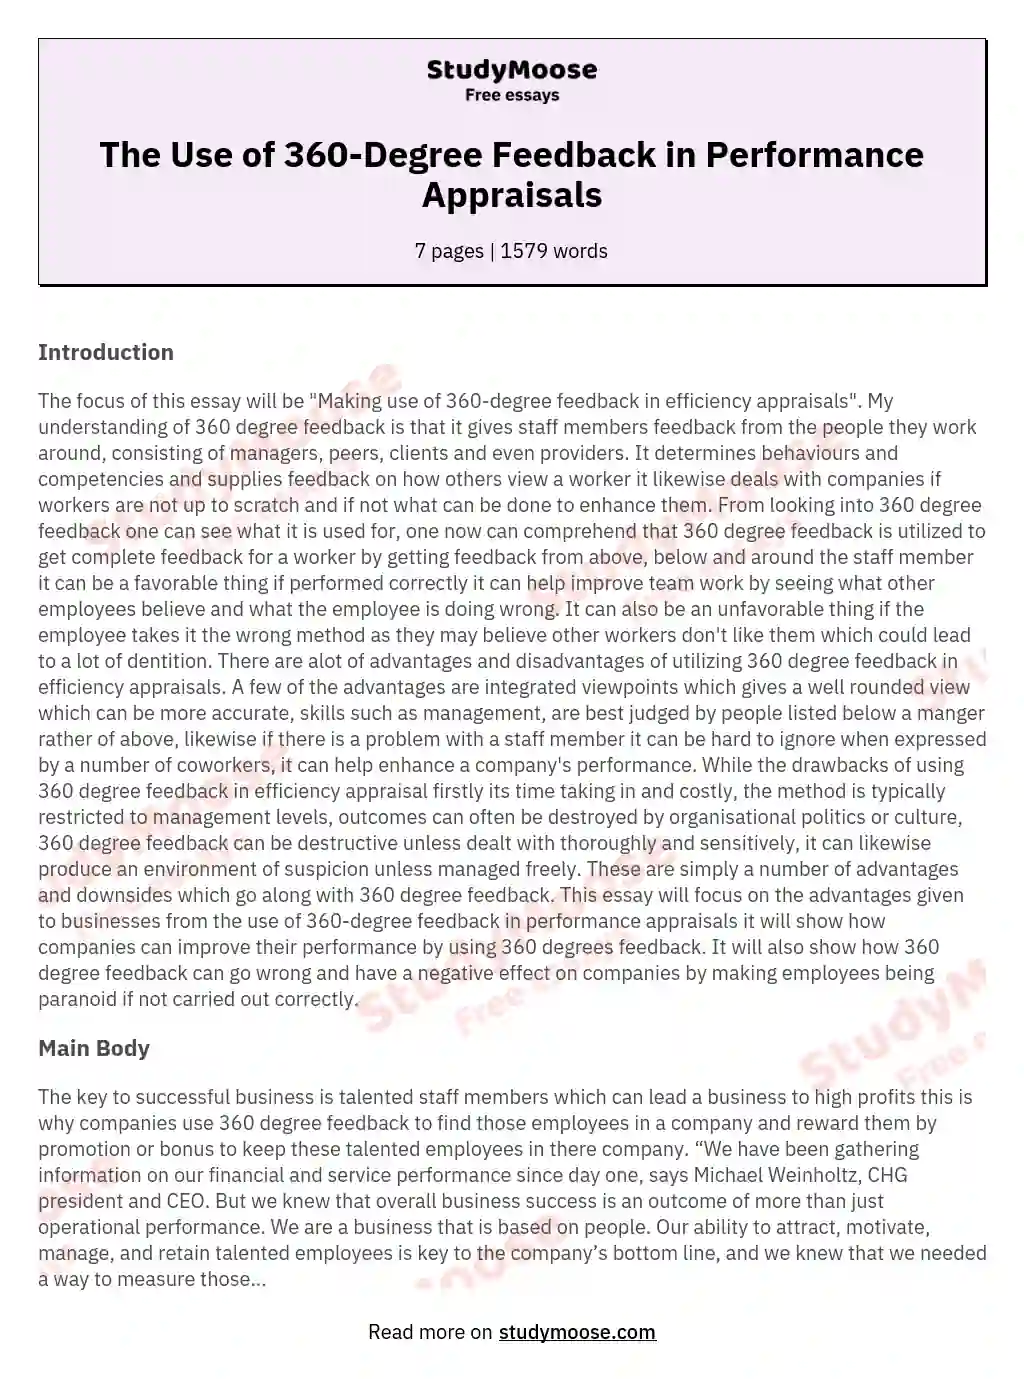 The Use of 360-Degree Feedback in Performance Appraisals essay